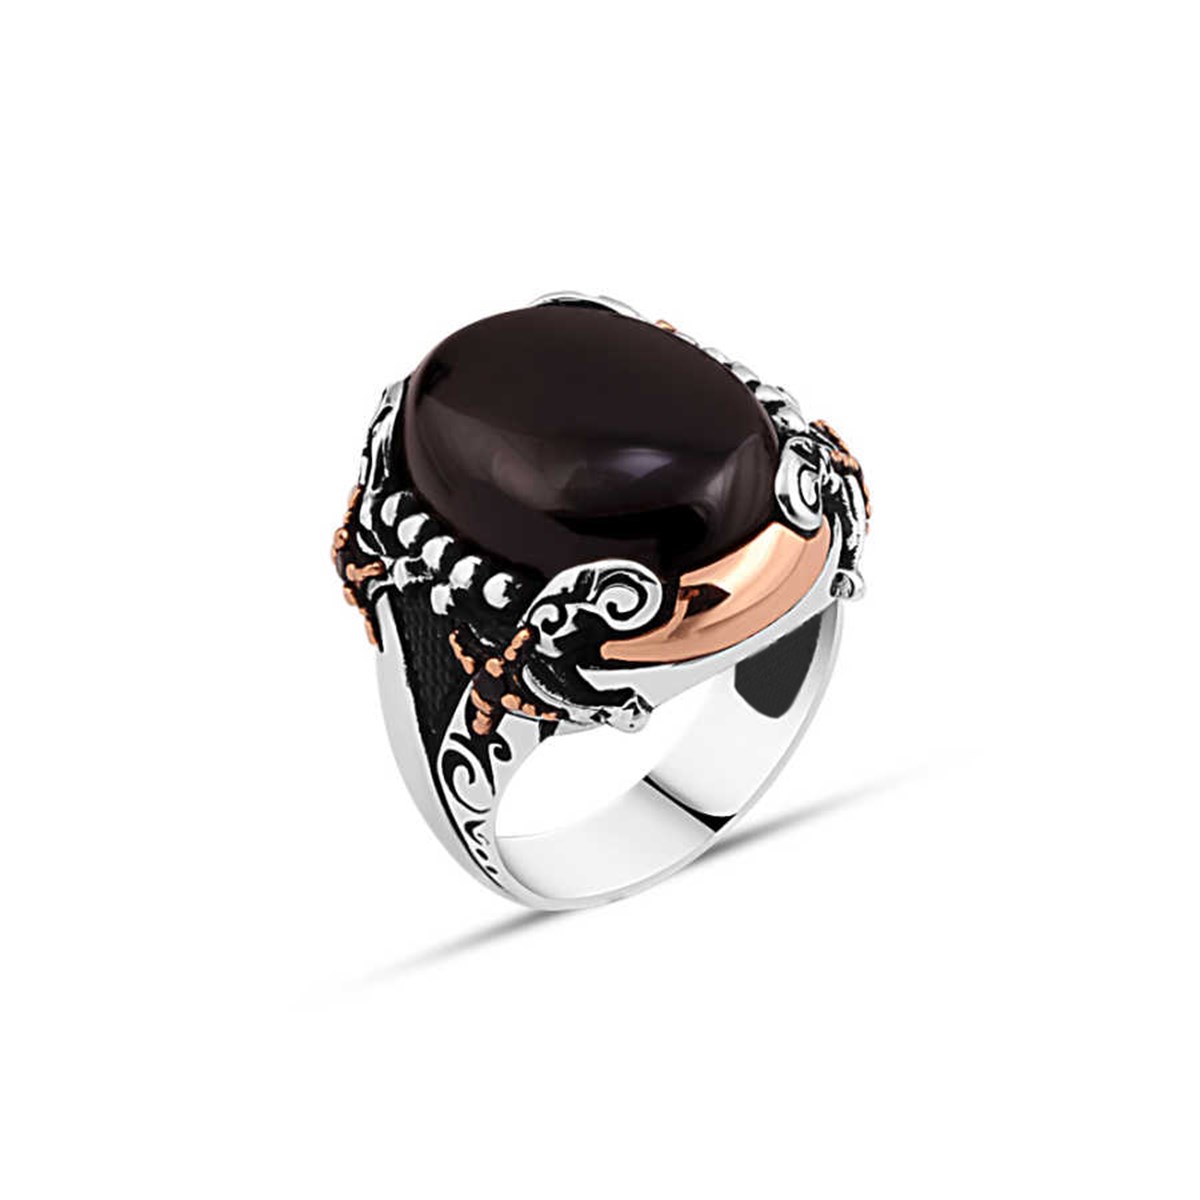 Hooded Sterling Silver Men's Ring with Onix Stone Edges